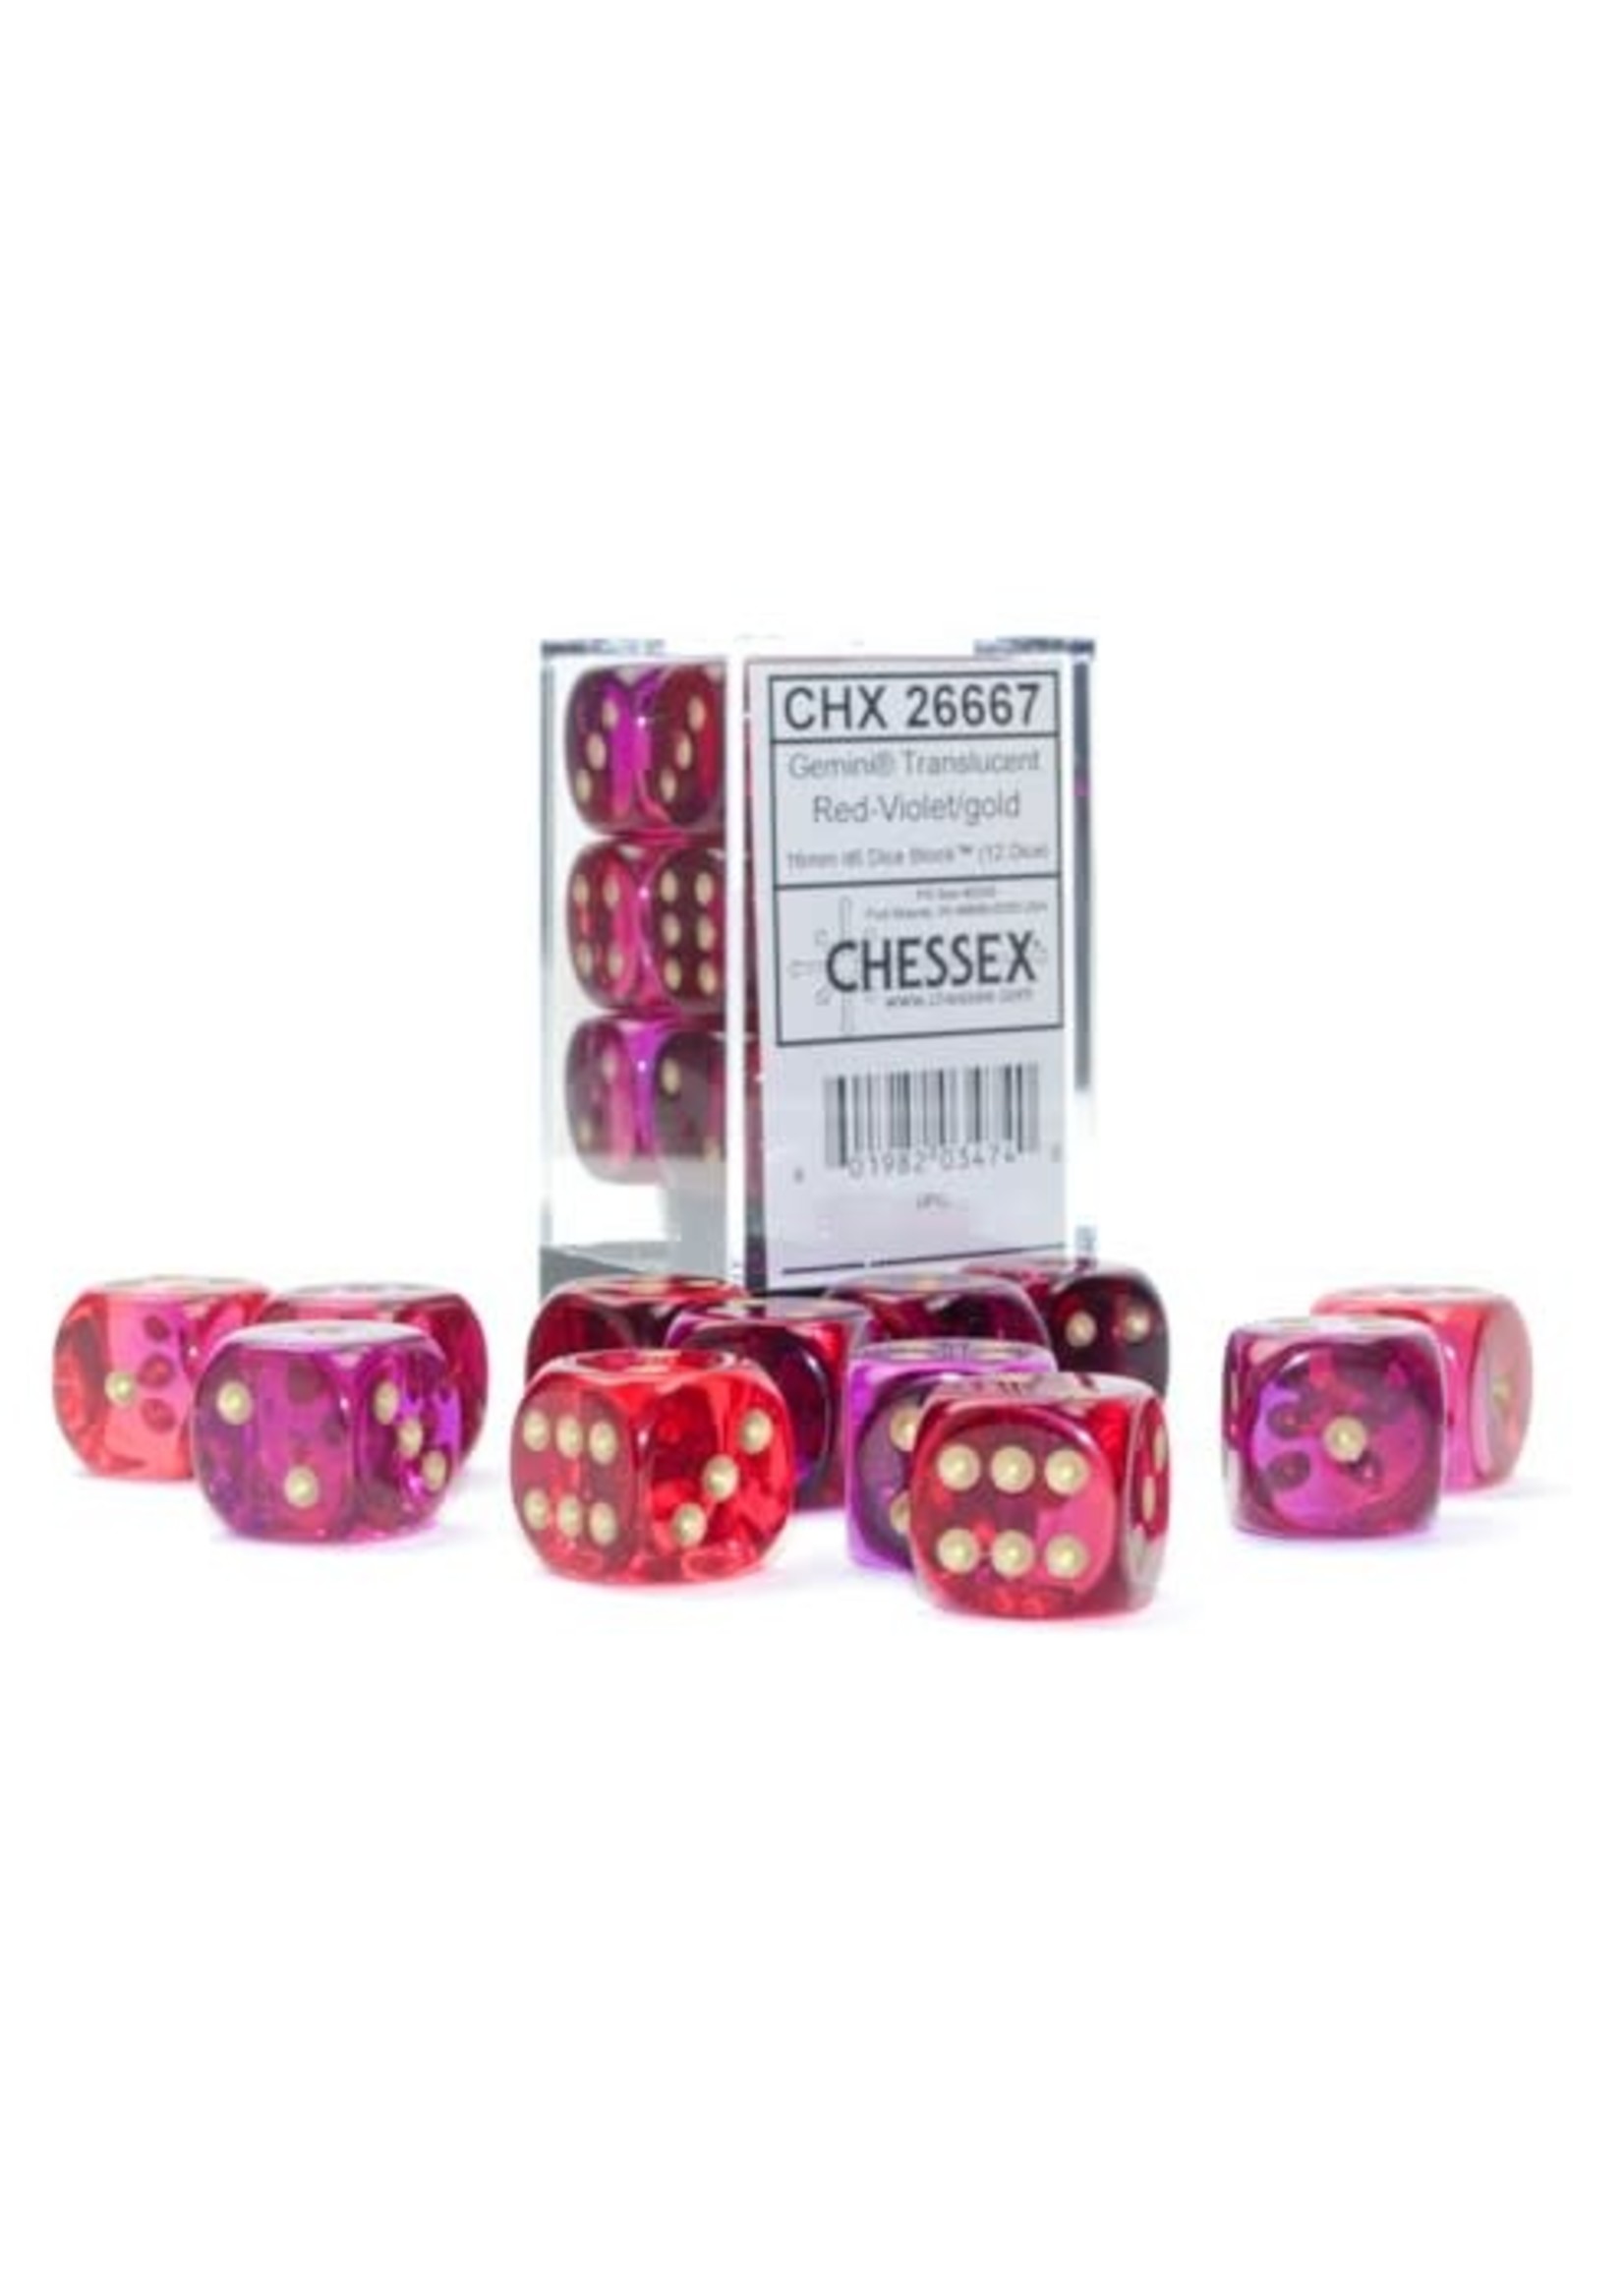 Chessex d6 Cube 16mm Gemini Translucent Red & Violet w/ gold (12)